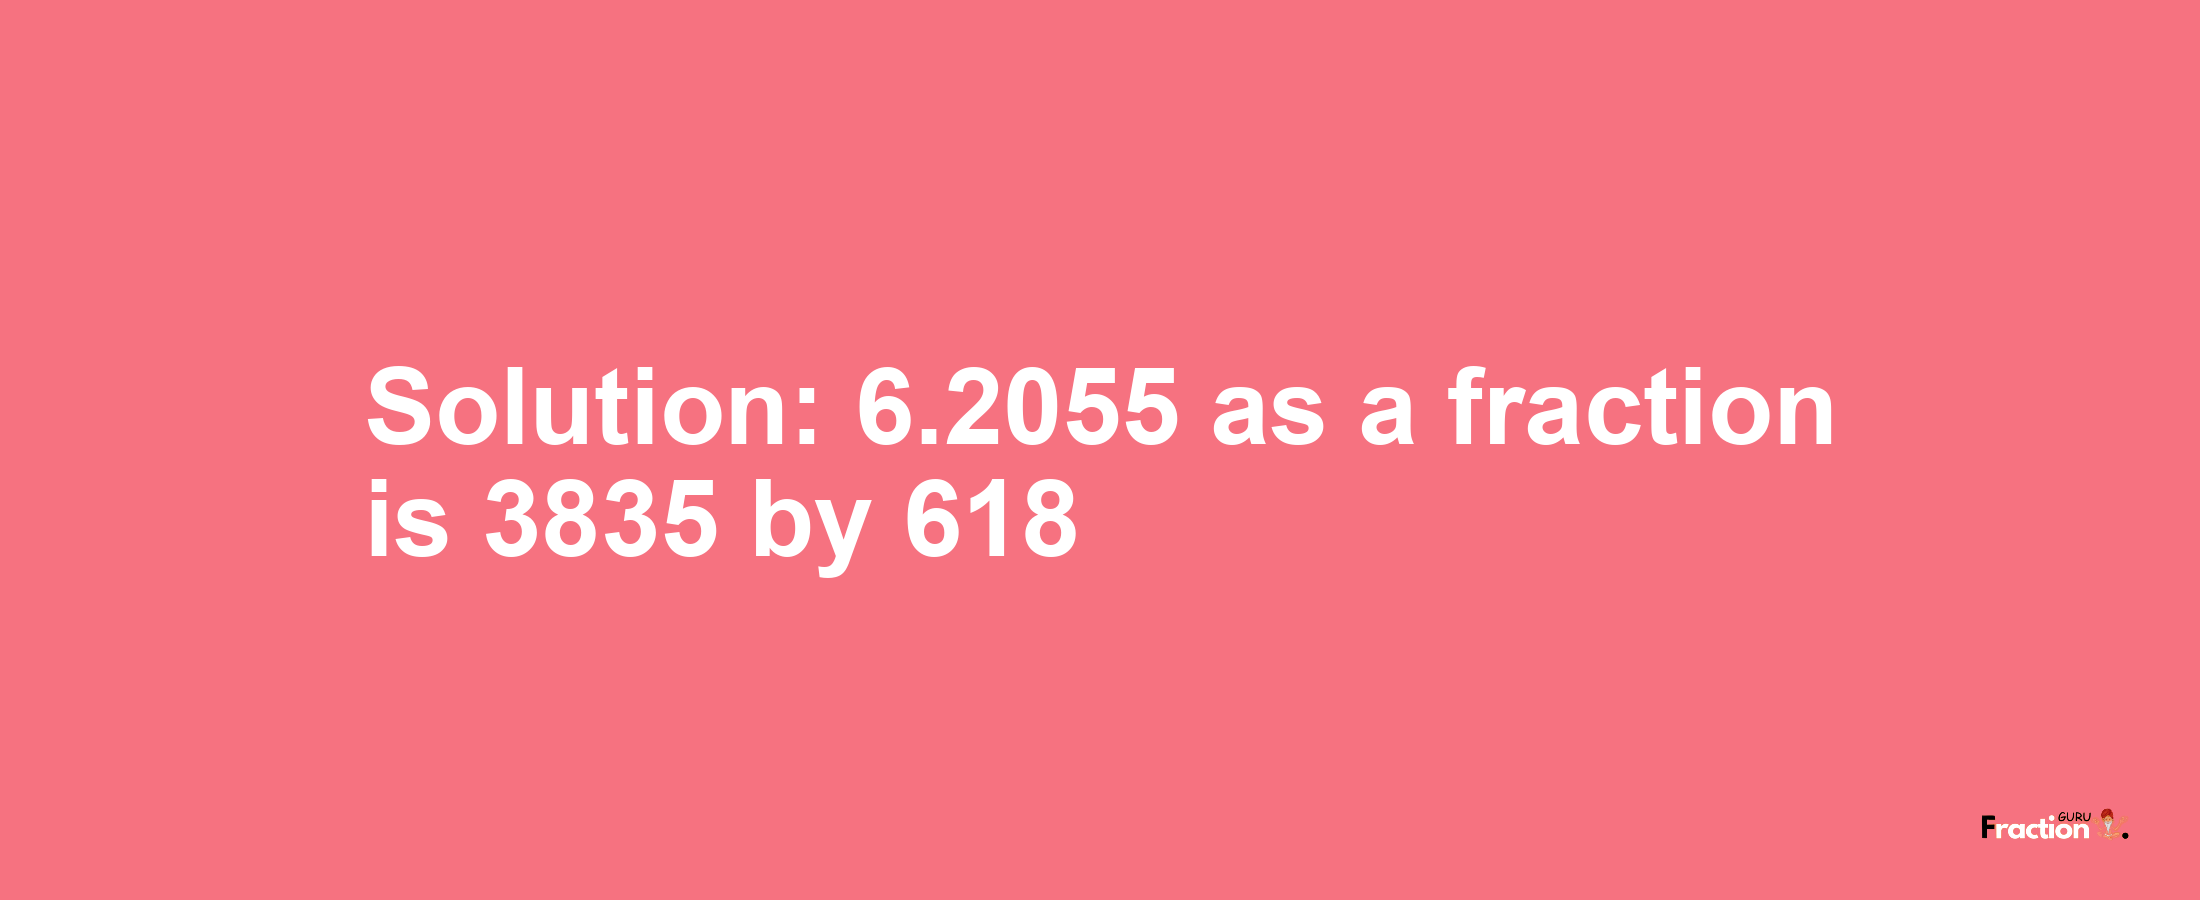 Solution:6.2055 as a fraction is 3835/618